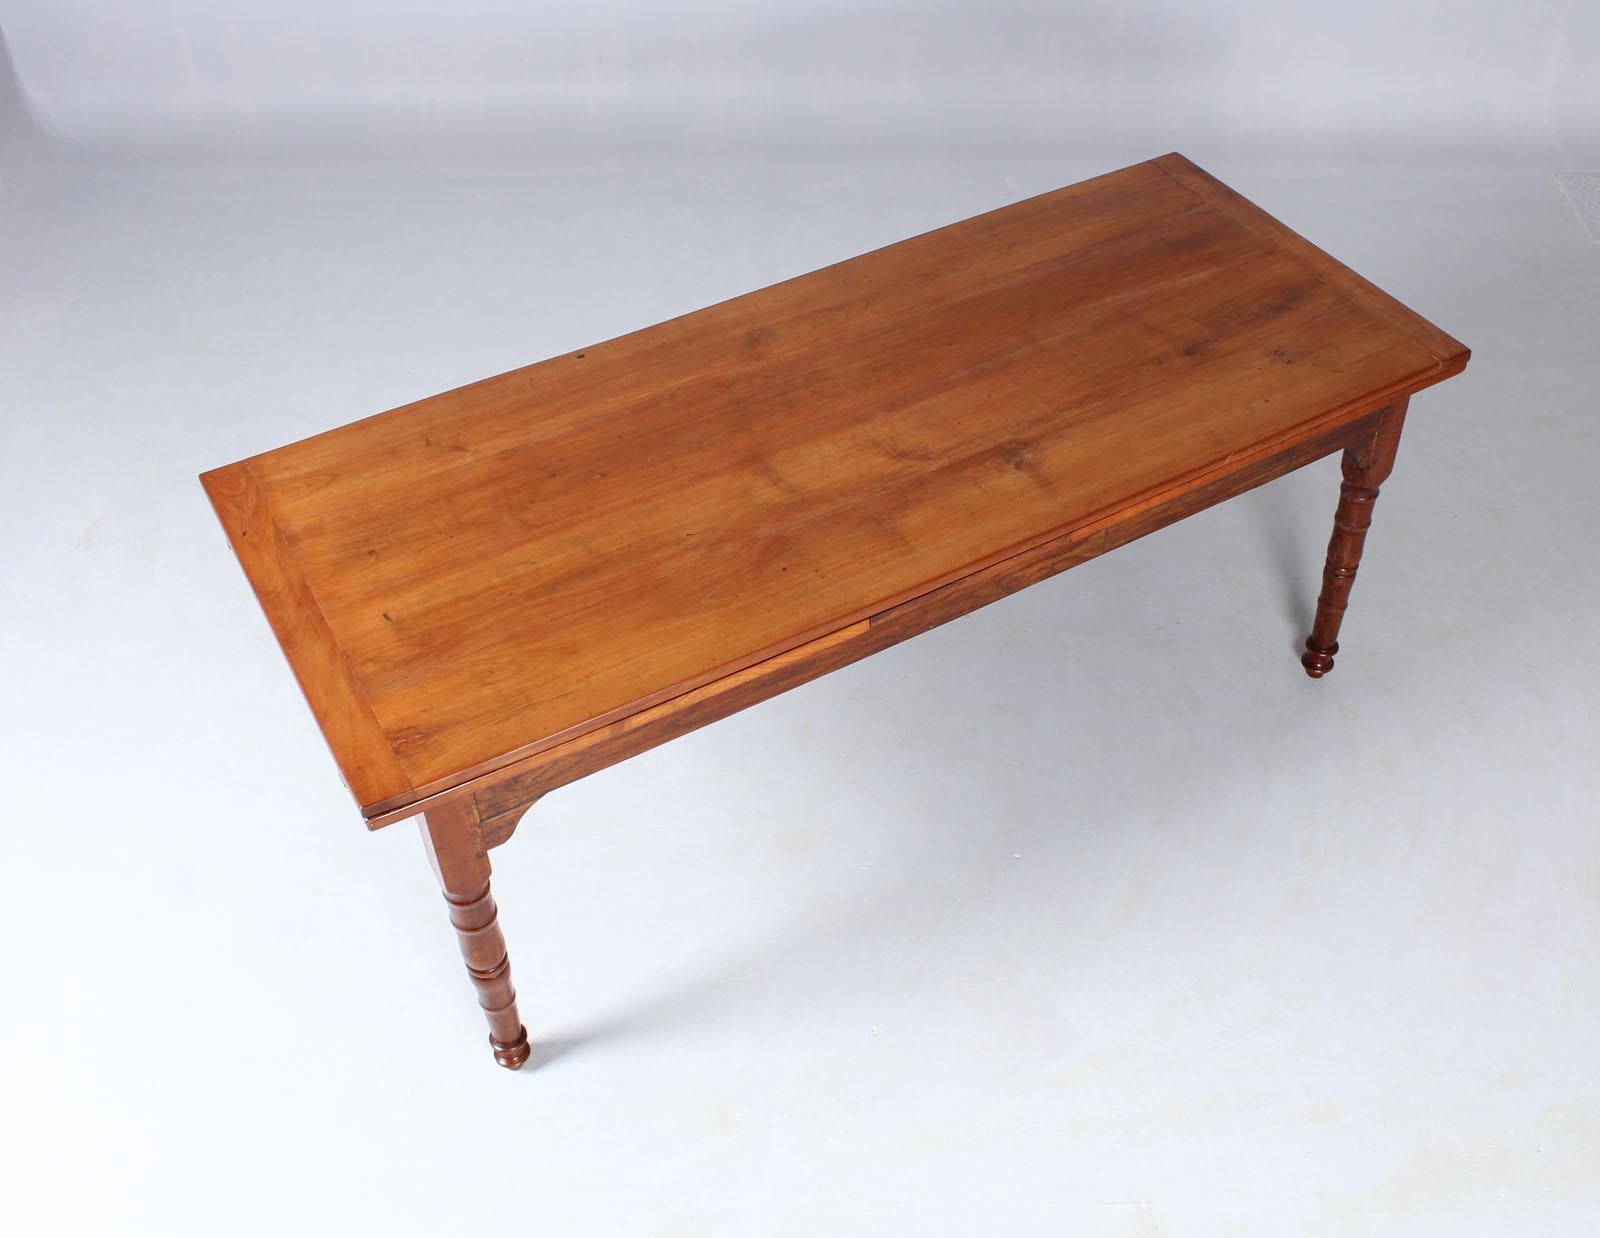 France
Cherry, chestnut
19th century, Louis-Philippe, circa 1850

Dimensions: H x W x L 79 cm x 80 cm x 197 cm (+ 76 cm + 84 cm)


French country house or farmhouse table from Normandy.

Turned legs with multiple profiles in solid